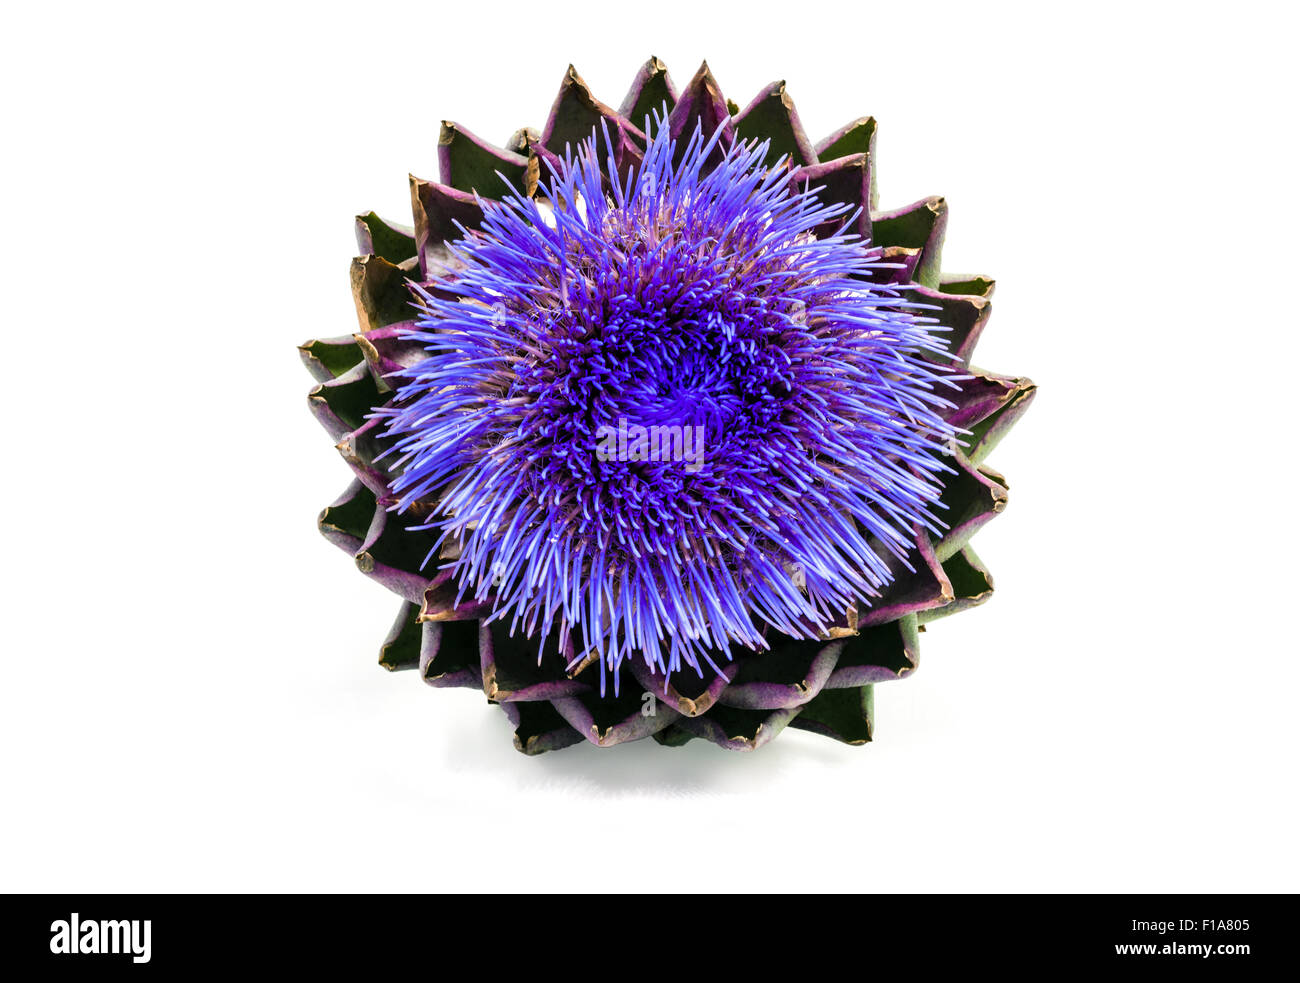 Blooming artichoke on white with clipping path Stock Photo